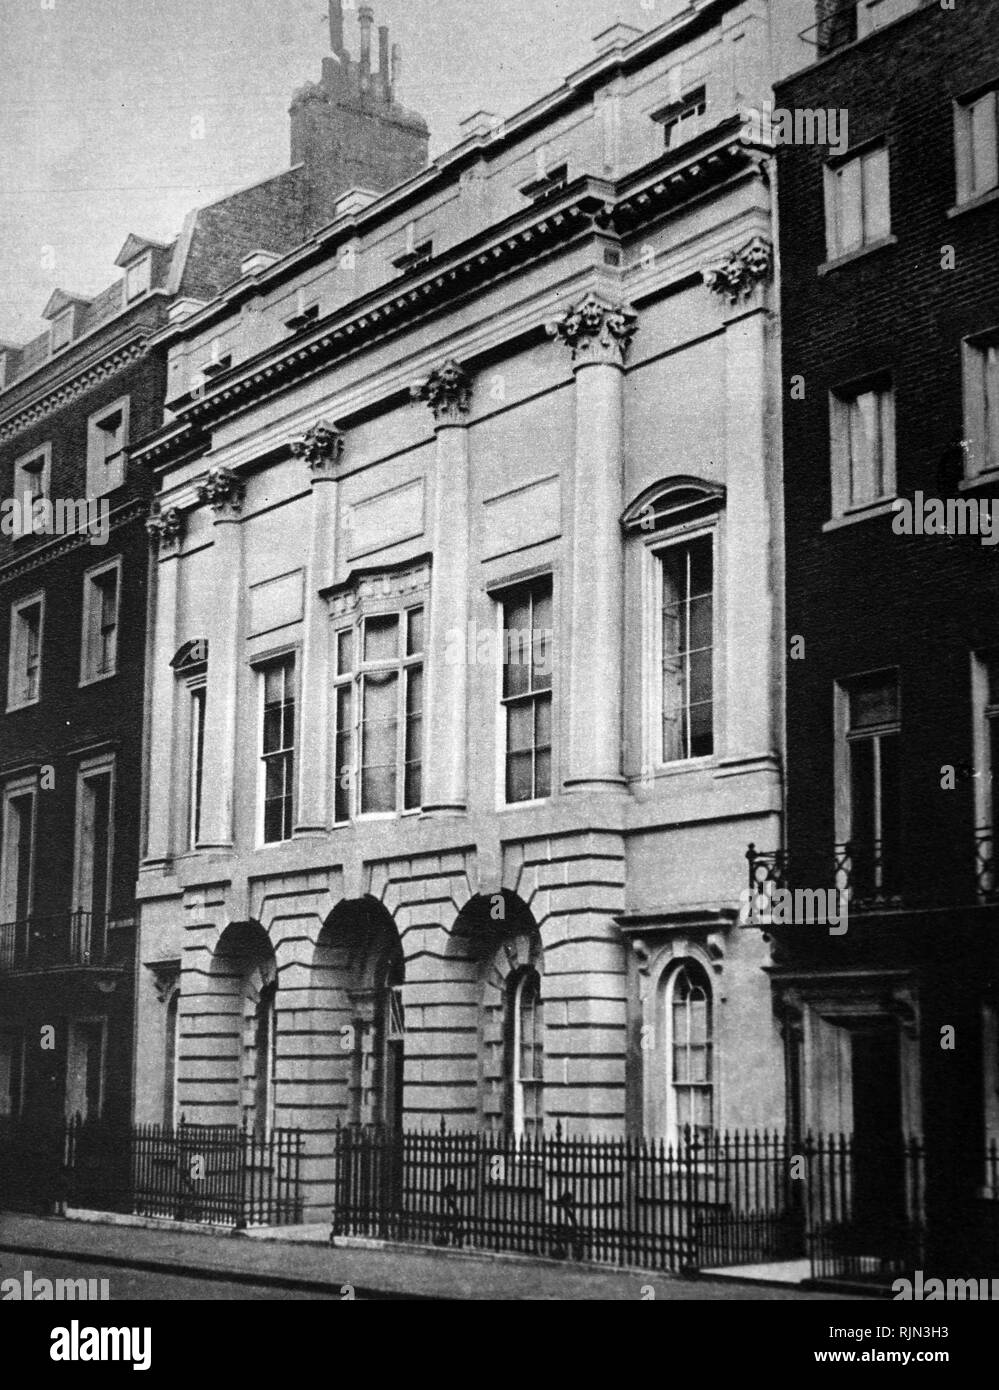 The home of Earl and Countess of Strathmore, at 17 Bruton Street, where Princess Elizabeth (later Queen Elizabeth II), was born on 21 April 1926 Stock Photo